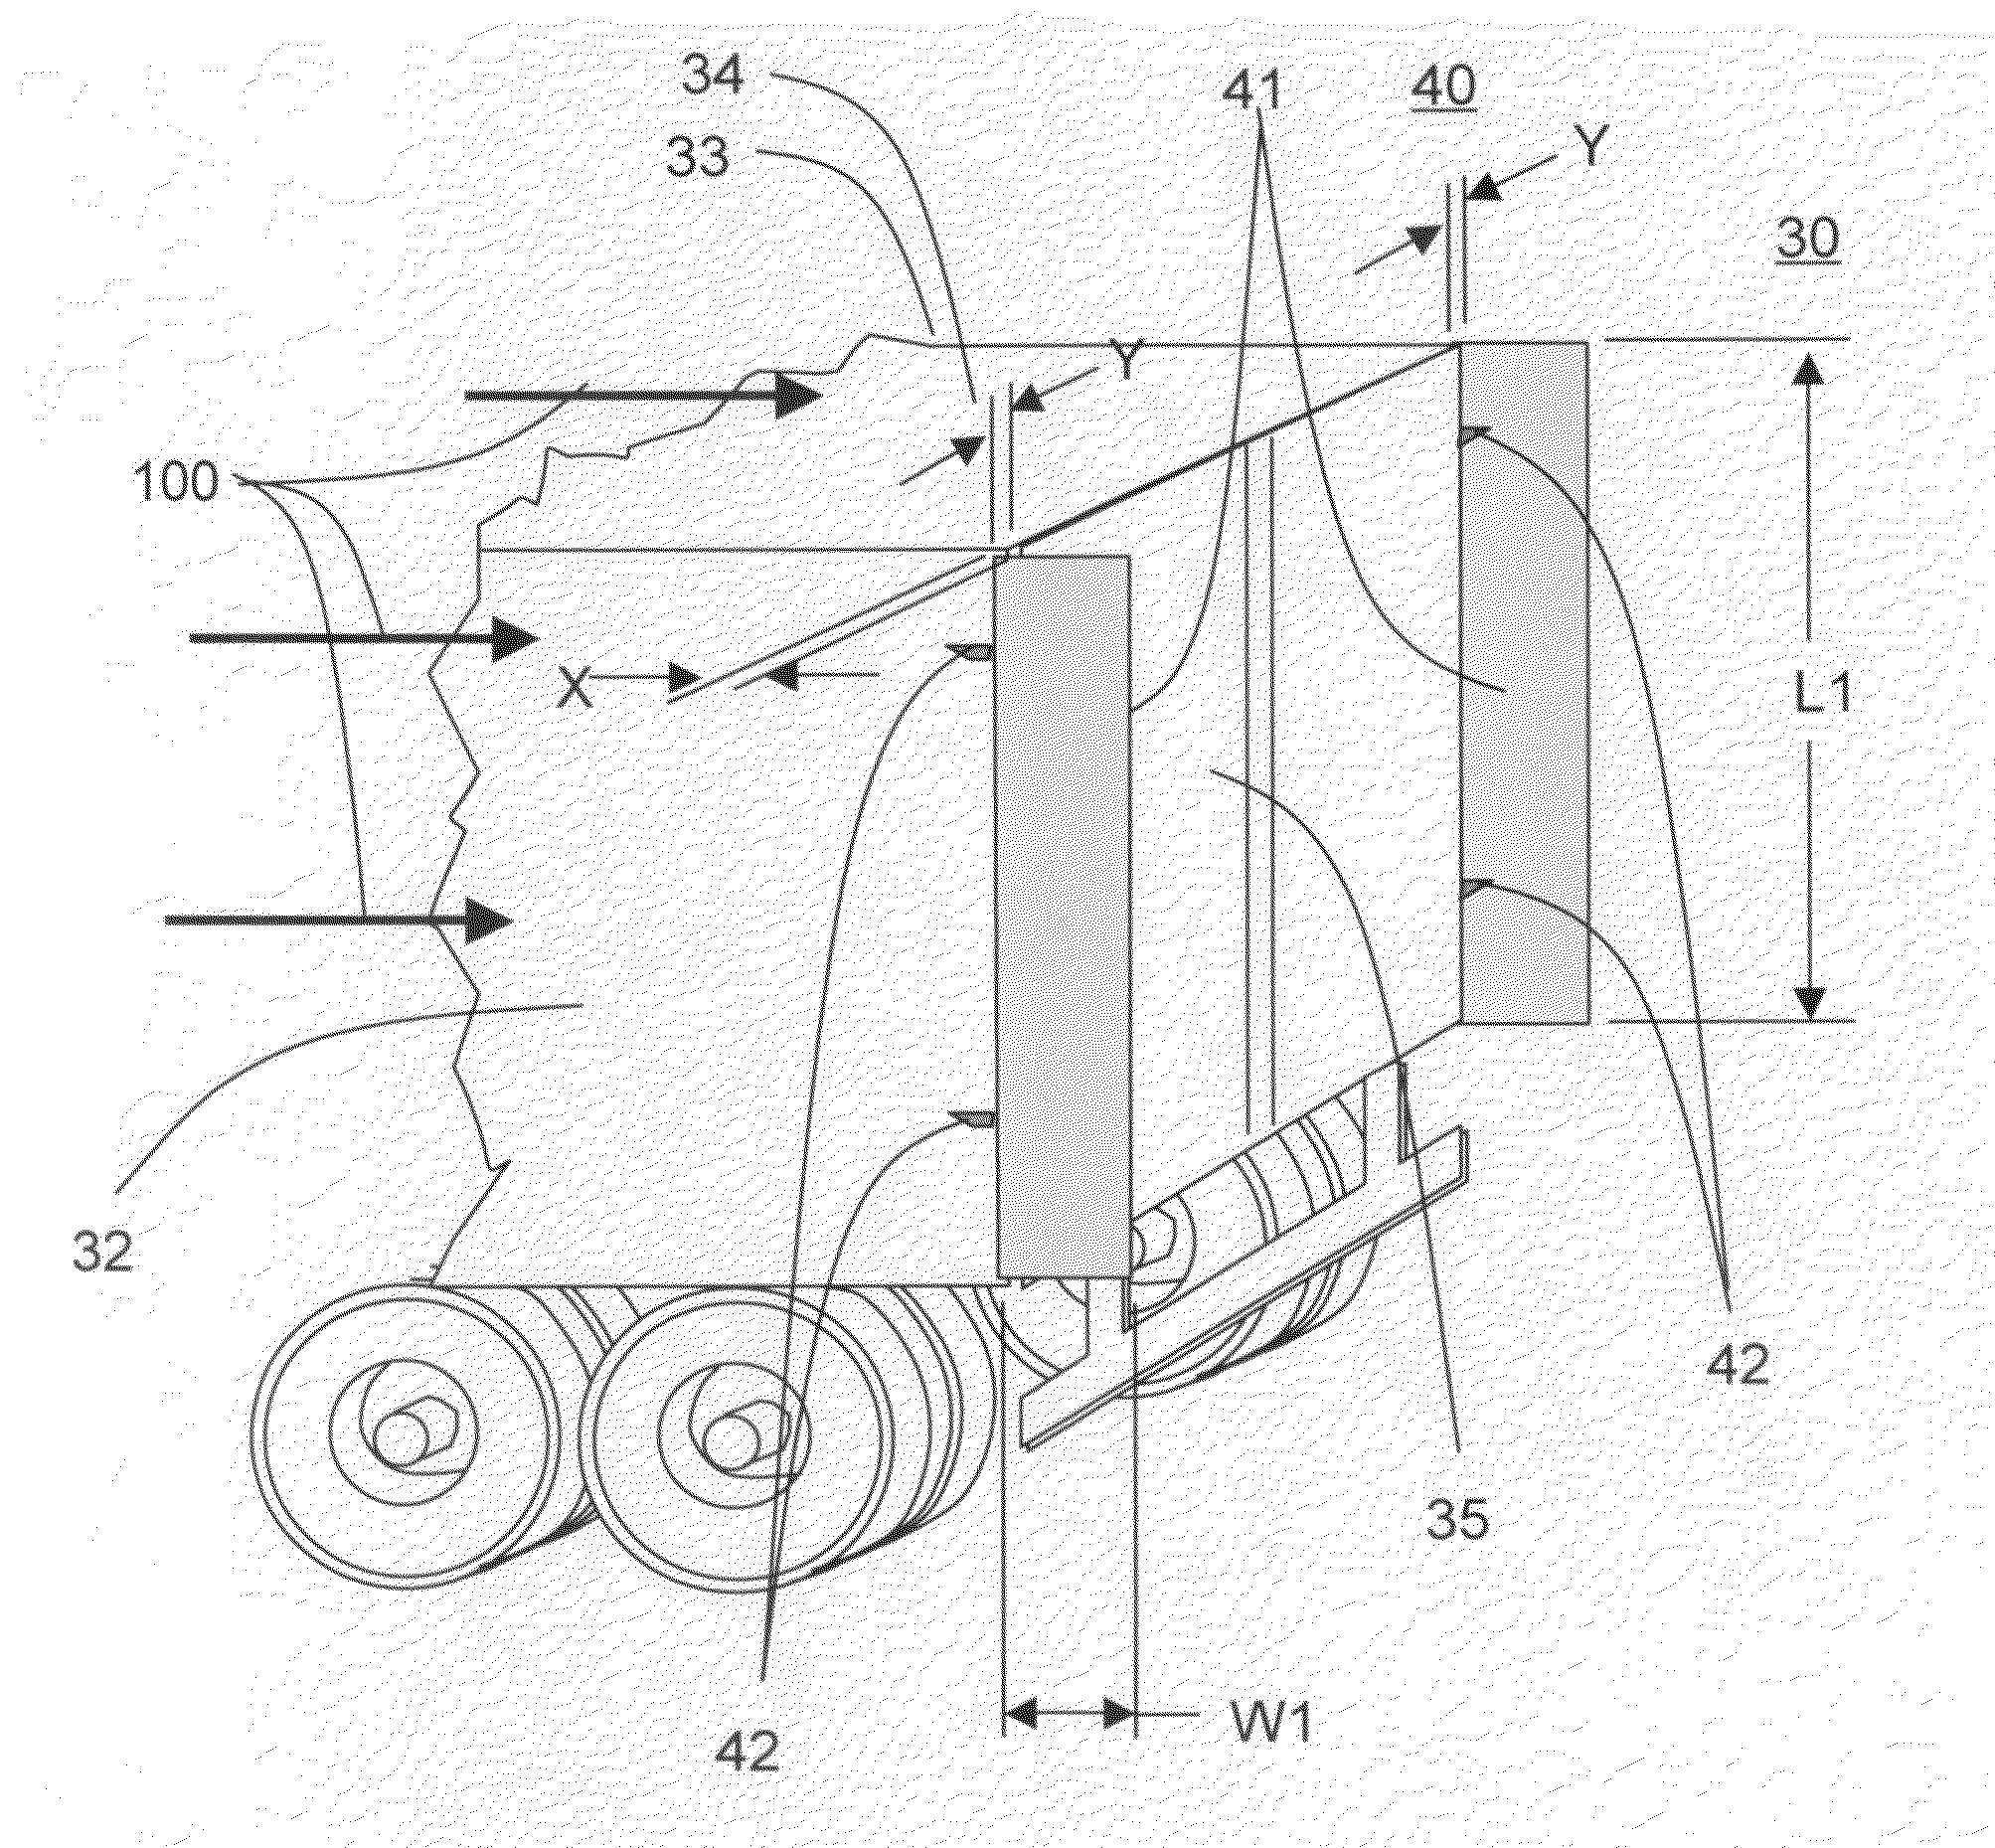 Outboard wake stabilization device and method for reducing the aerodynamic drag of ground vehicles